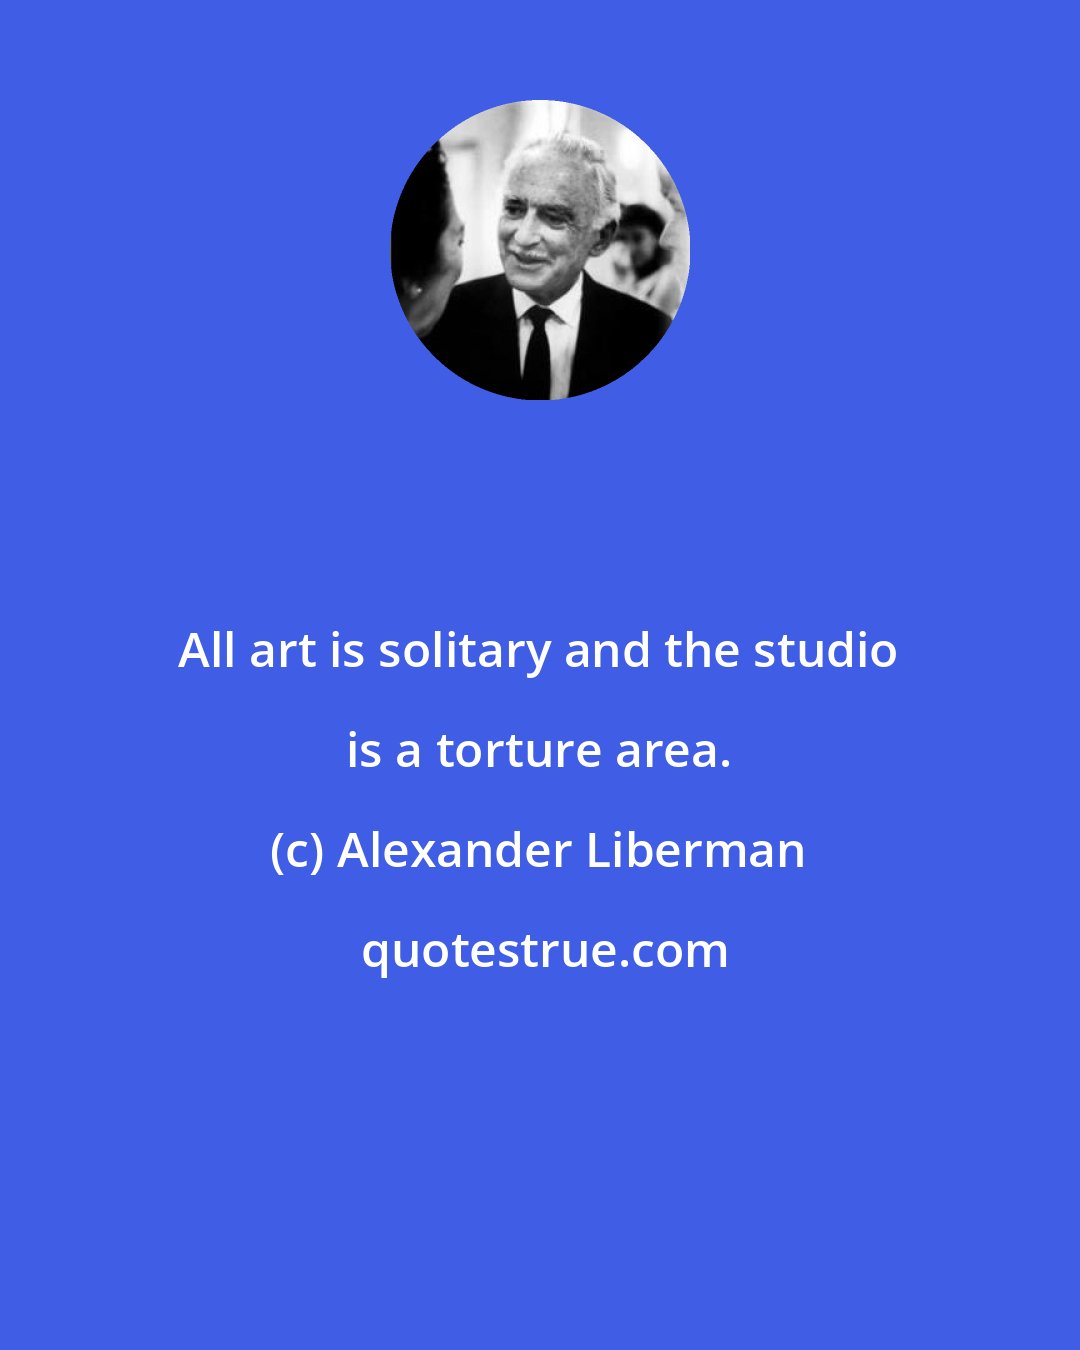 Alexander Liberman: All art is solitary and the studio is a torture area.